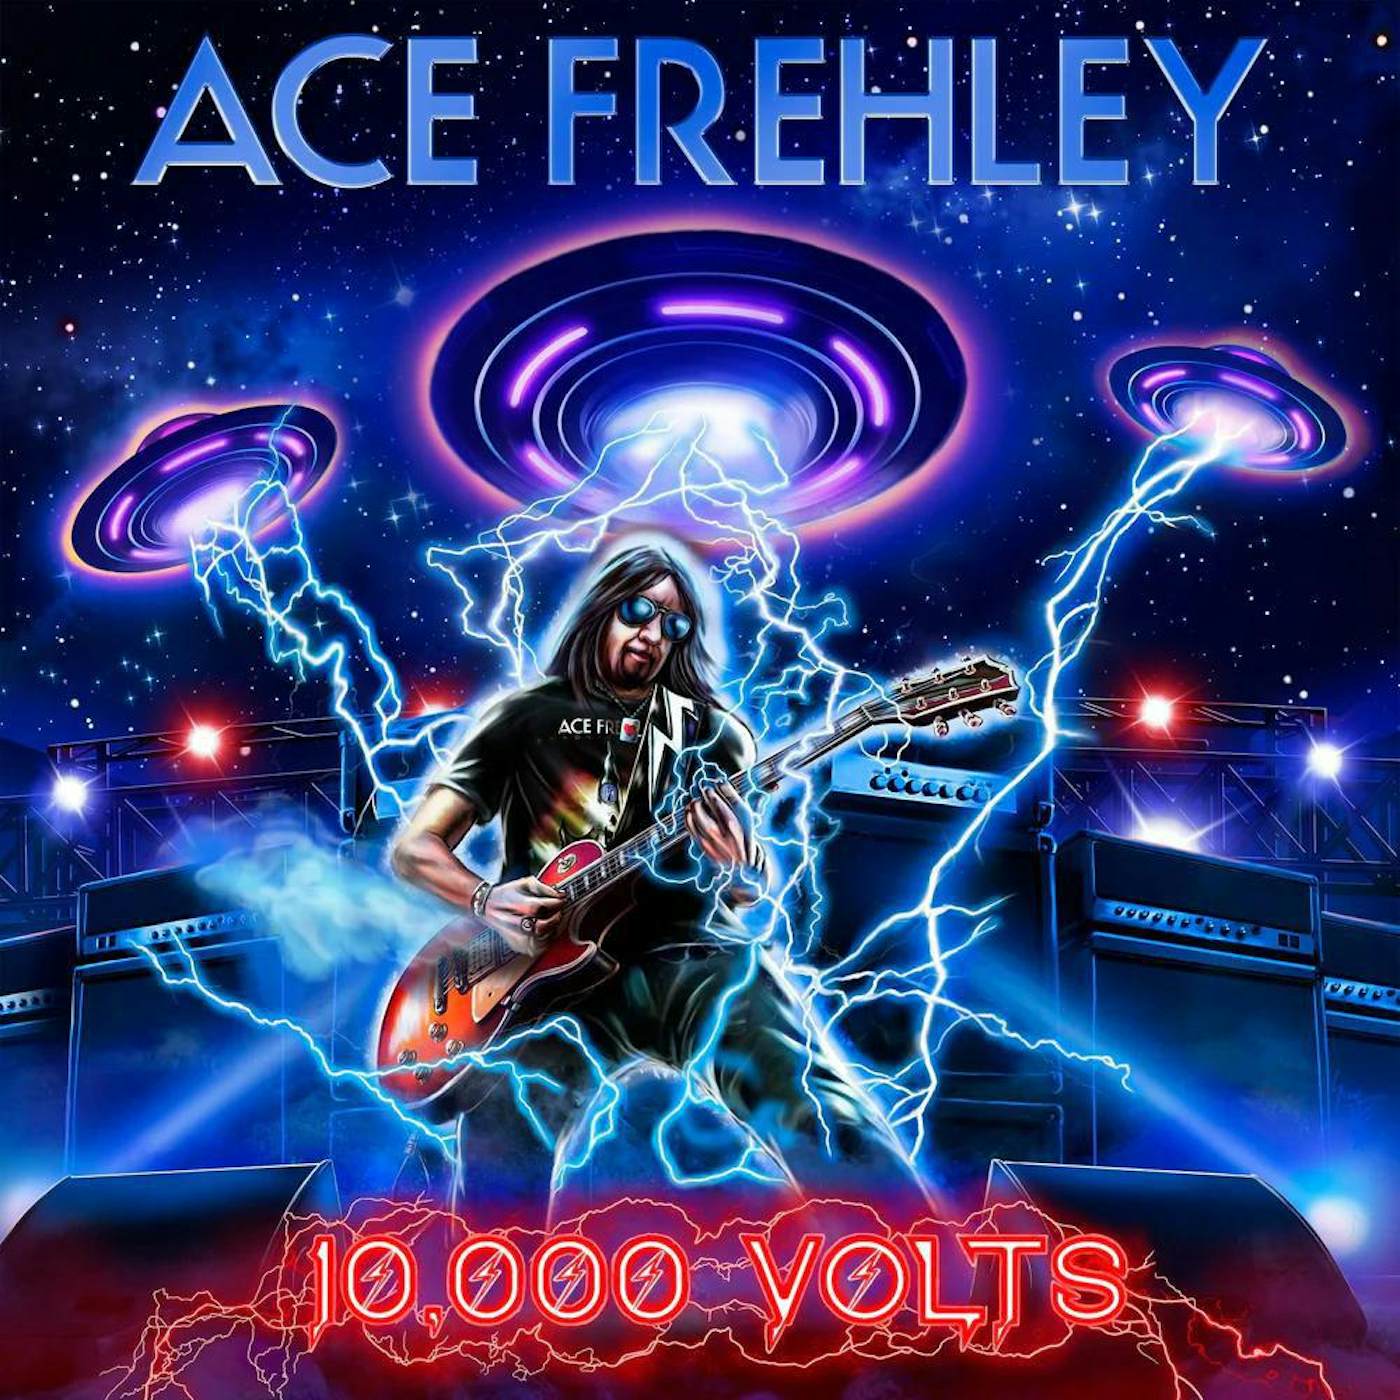 Ace Frehley 10,000 Volts (Red) Vinyl Record